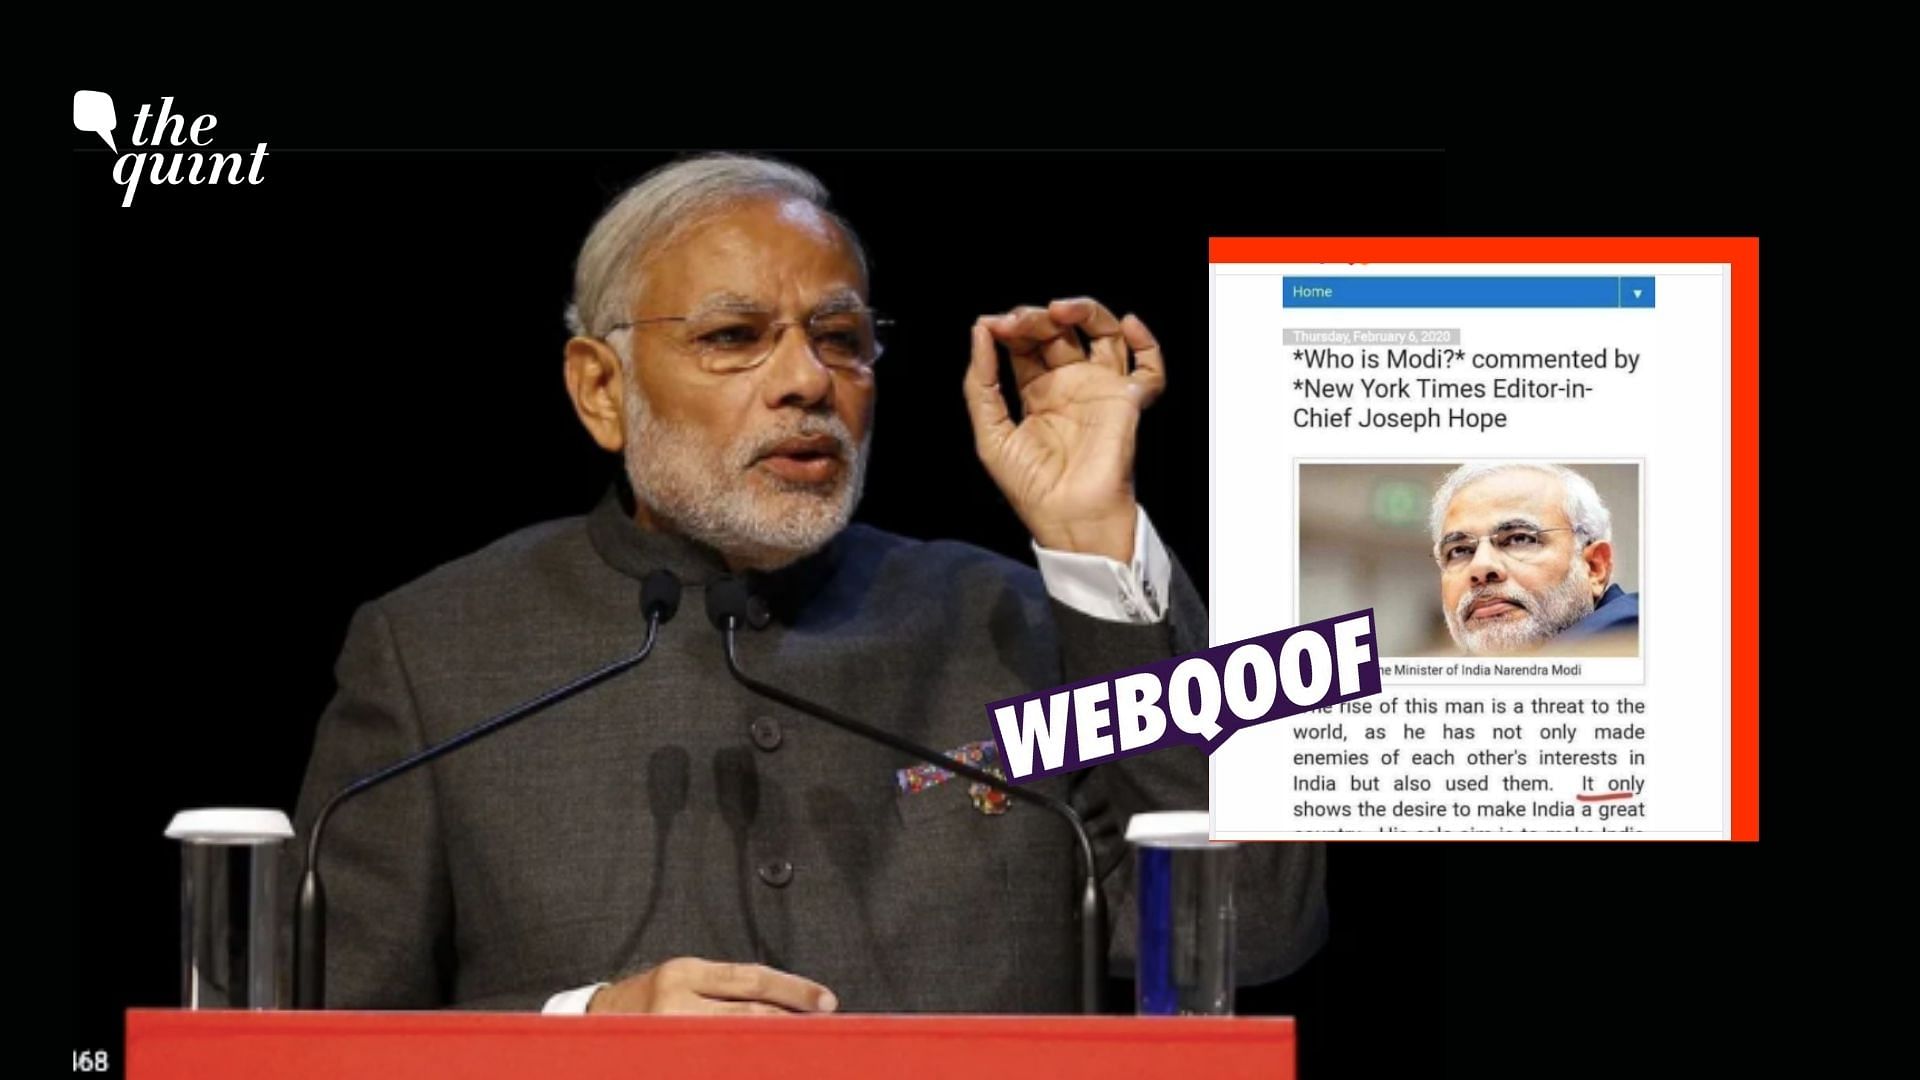 A viral piece of text praising PM Modi, purportedly written by one Joseph Hope, who is being referred to as the editor-in-chief of the <b>New York Times</b>, is doing the rounds on social media.